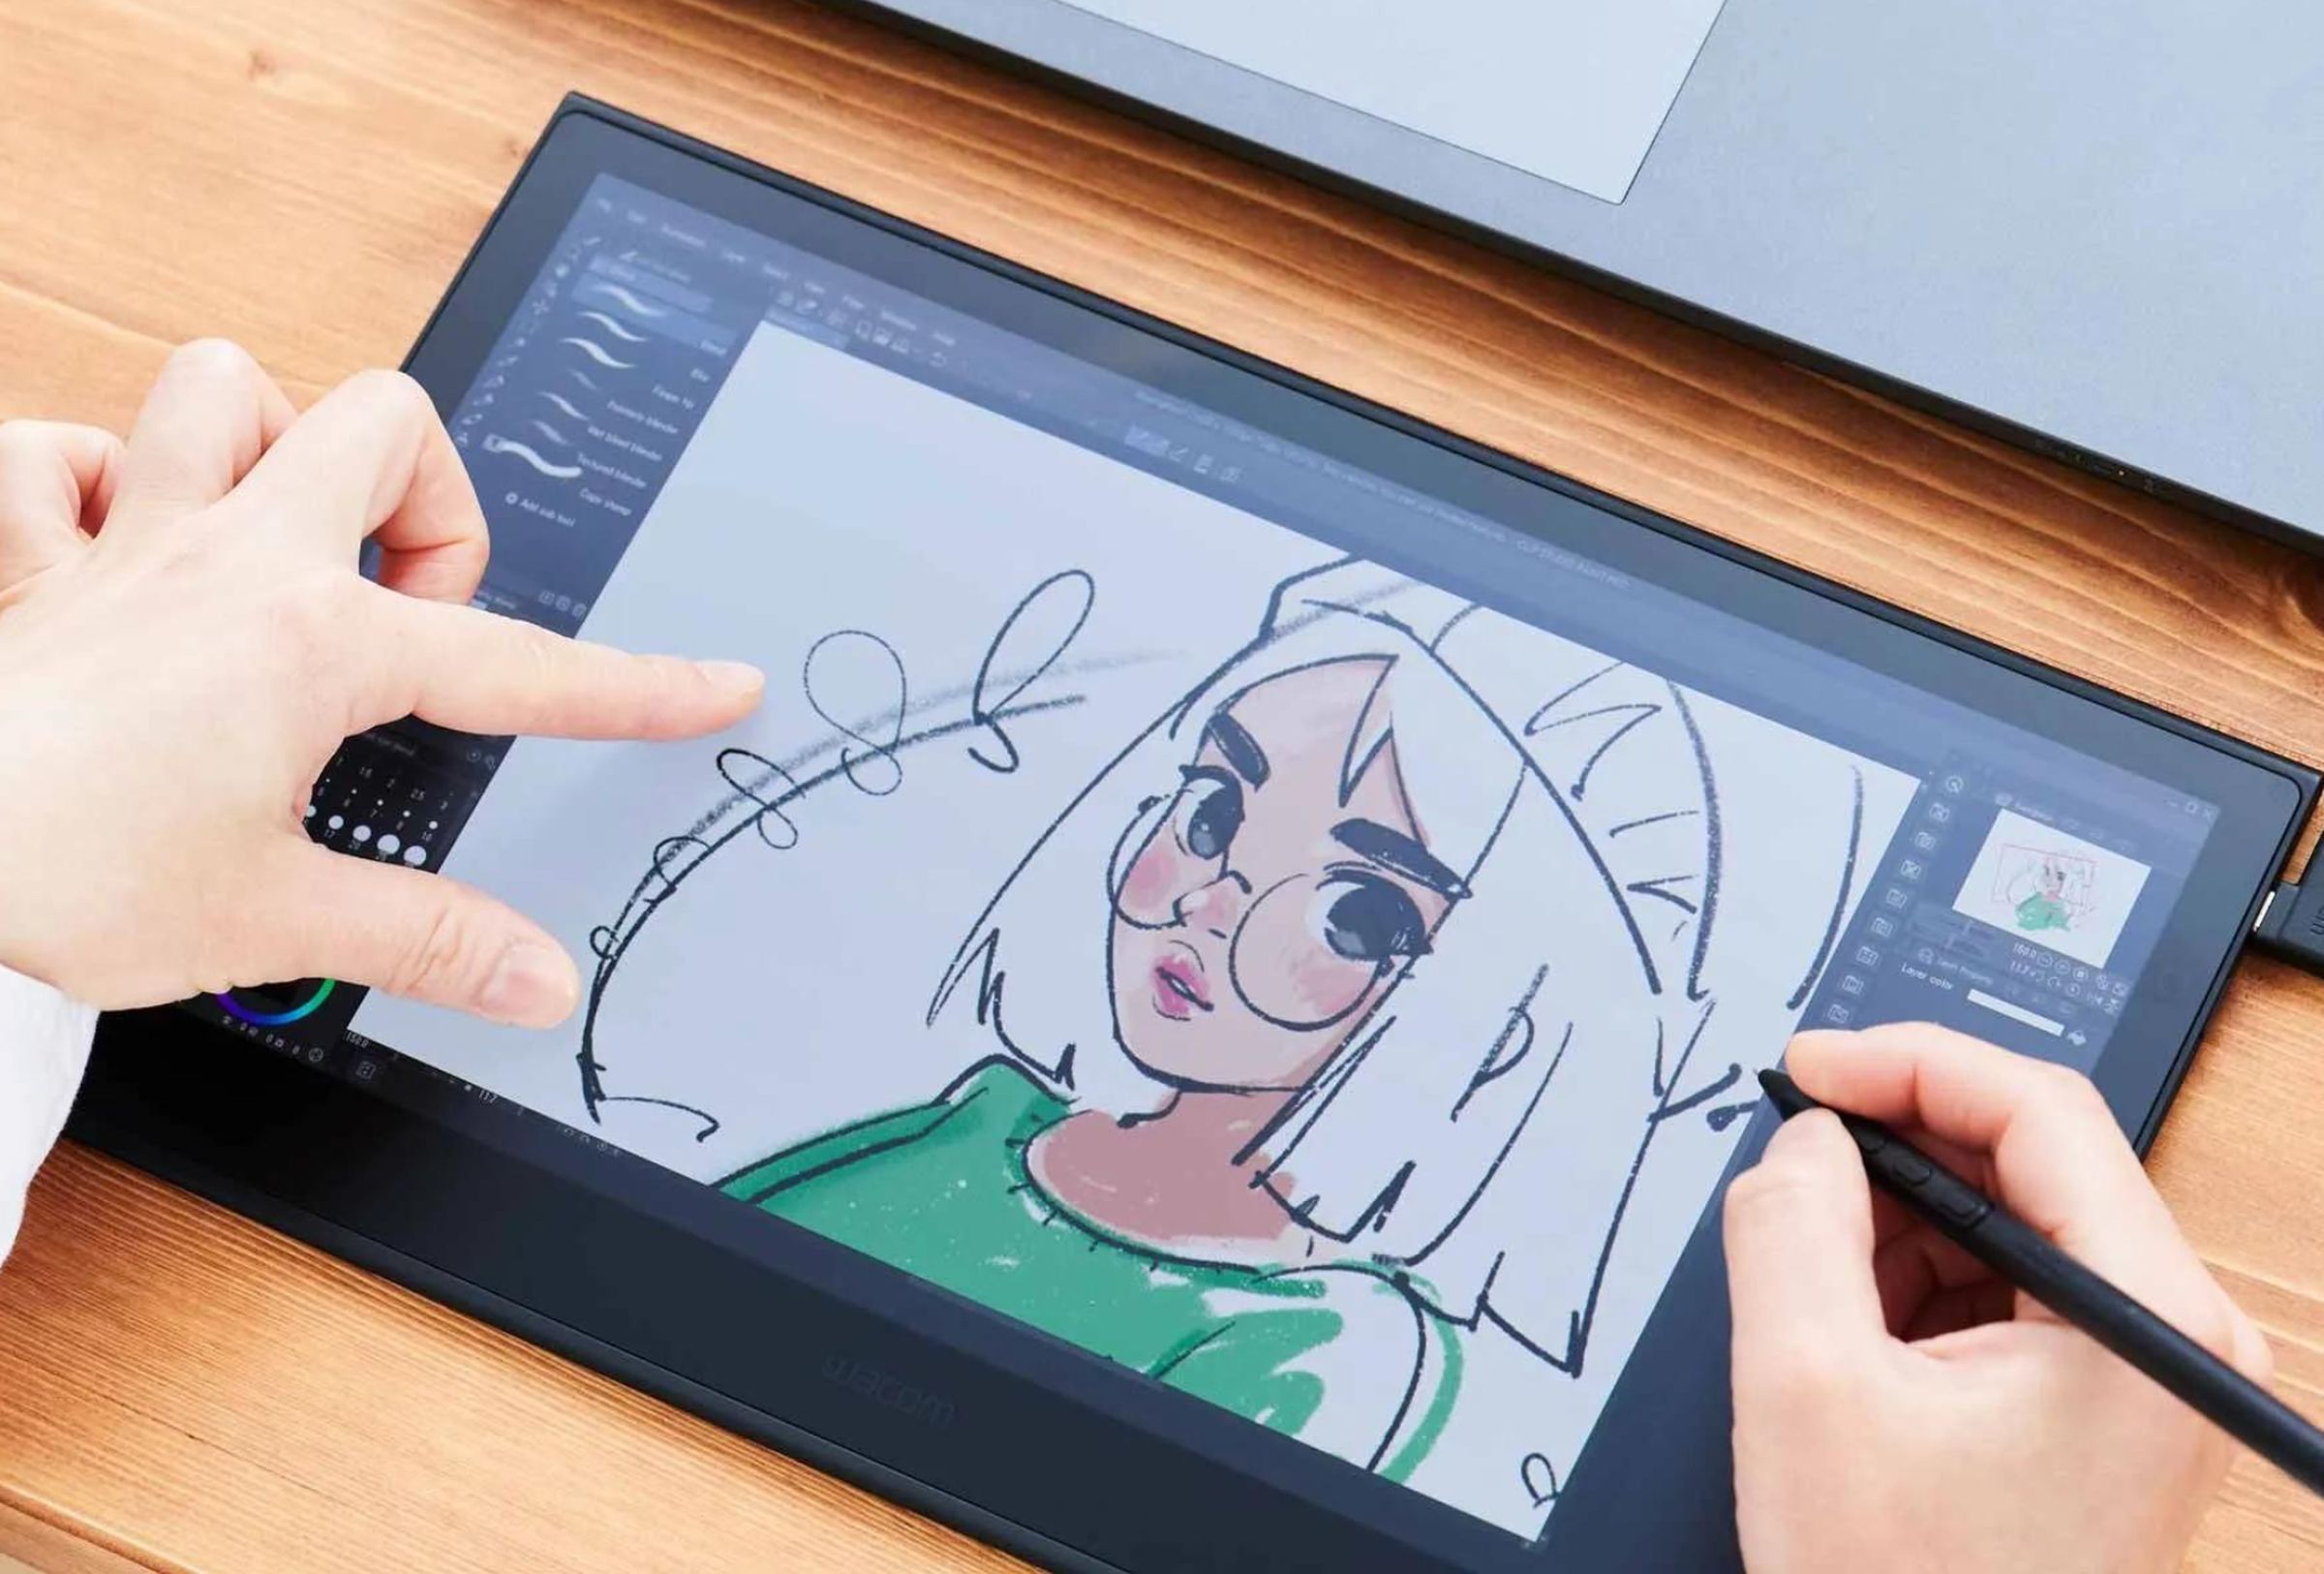 The Wacom Movink 13 drawing tablet being used with fingers.